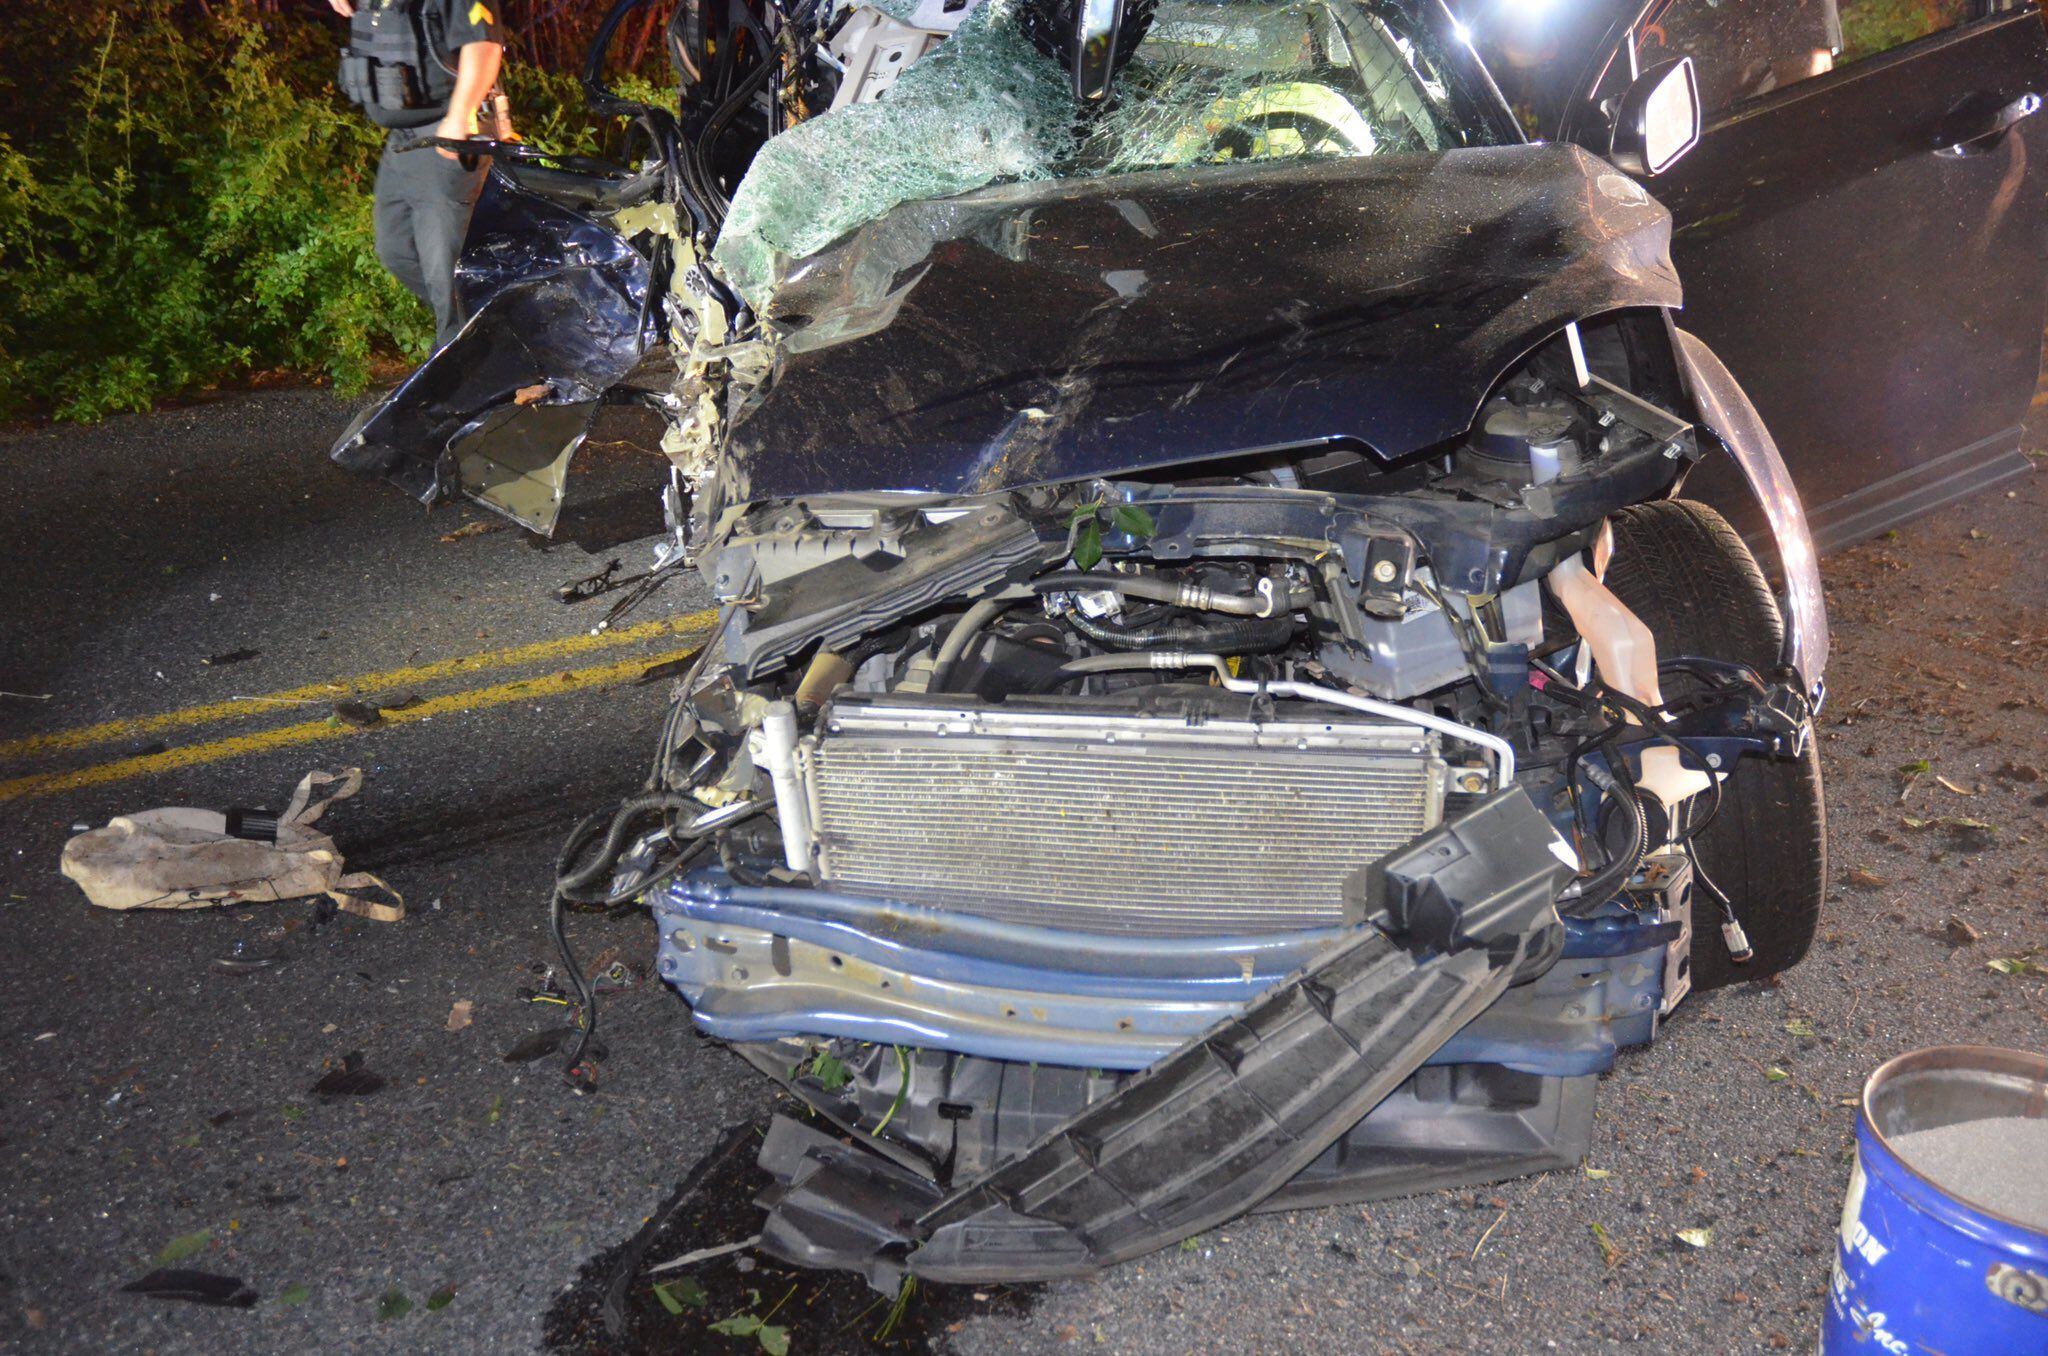 19-Year-Old from Harvard Critically Injured in Multi-Vehicle Crash on